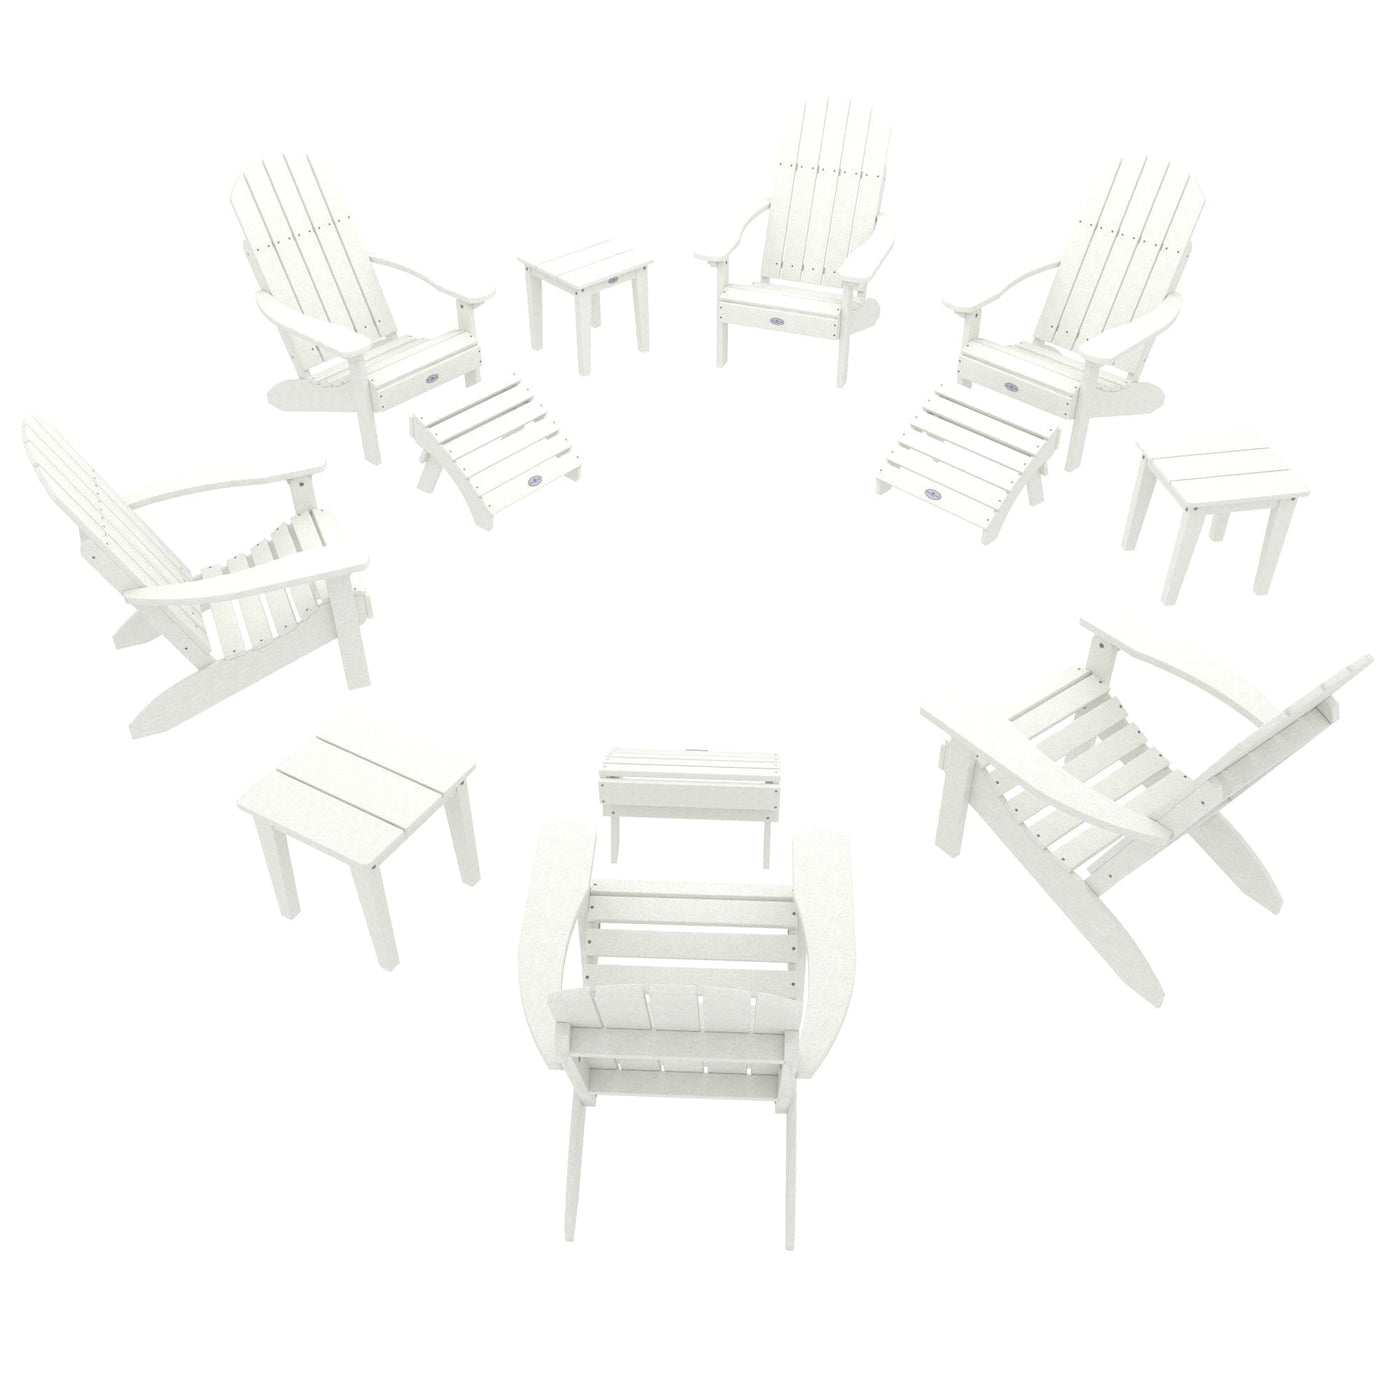 Cape Classic Adirondack, Side Table and Ottoman 12 pc Set Kitted Set Bahia Verde Outdoors Coconut White 